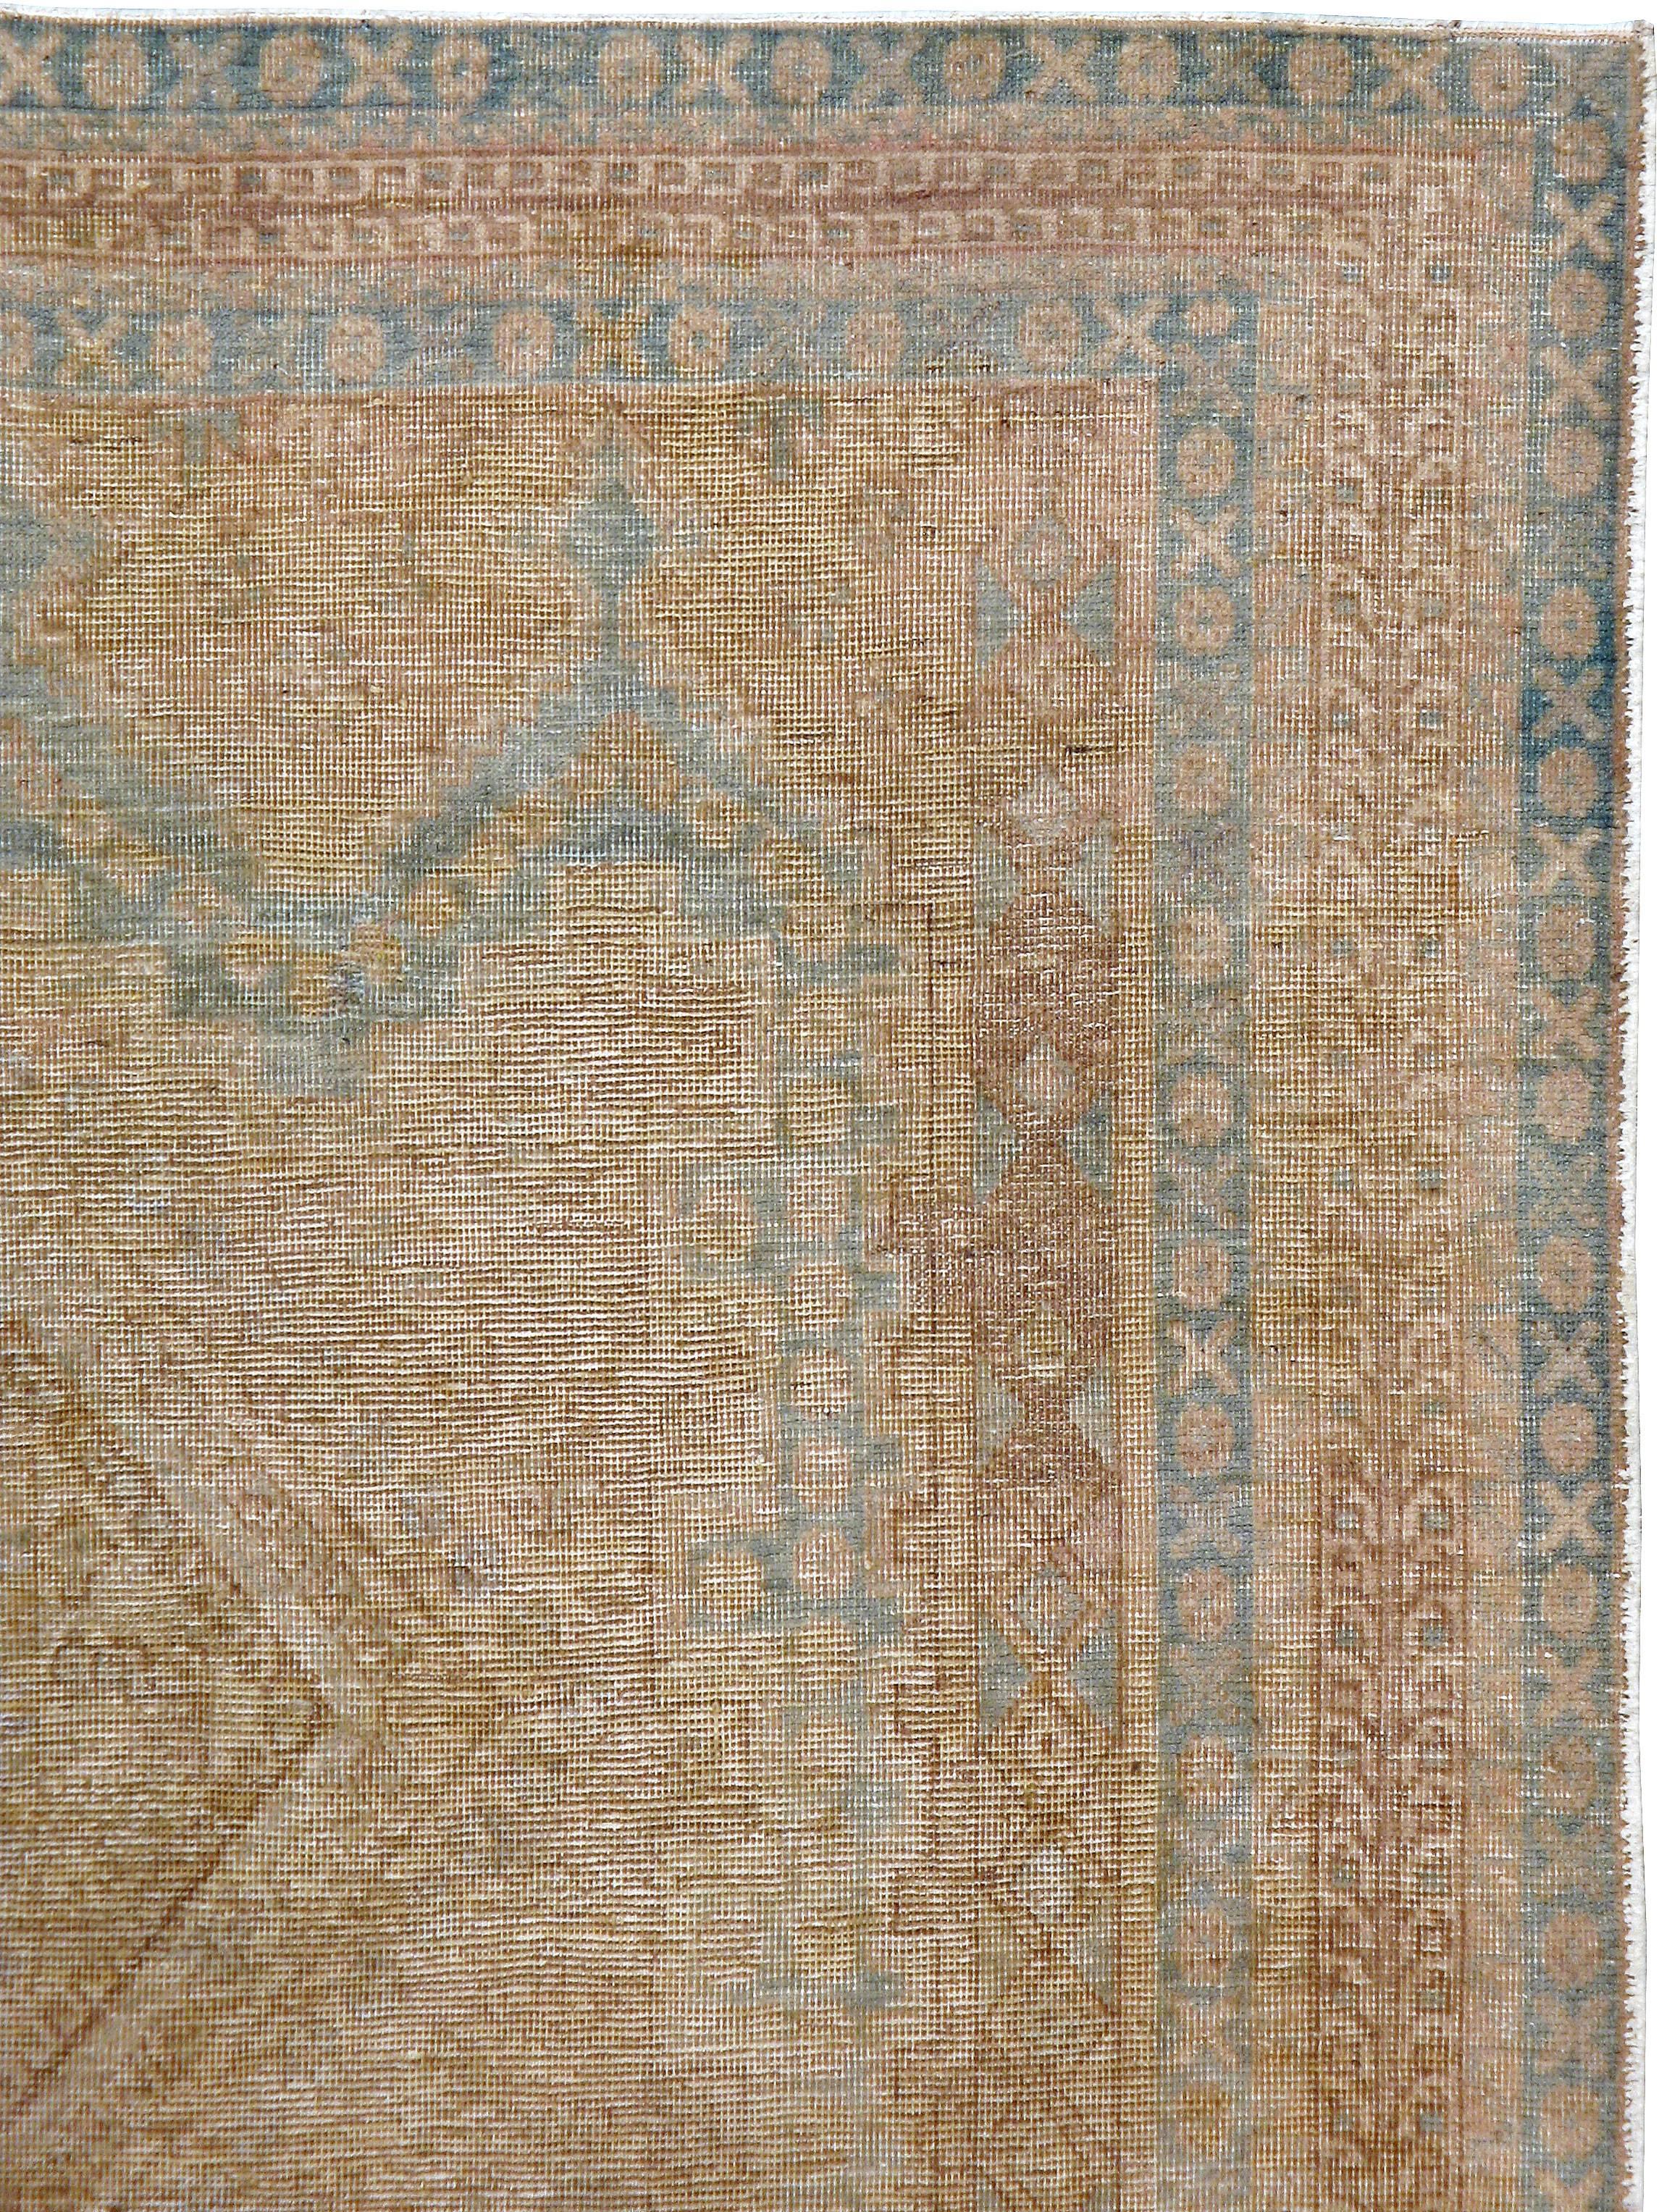 An antique Persian Afshar carpet from the second quarter of the 20th century.